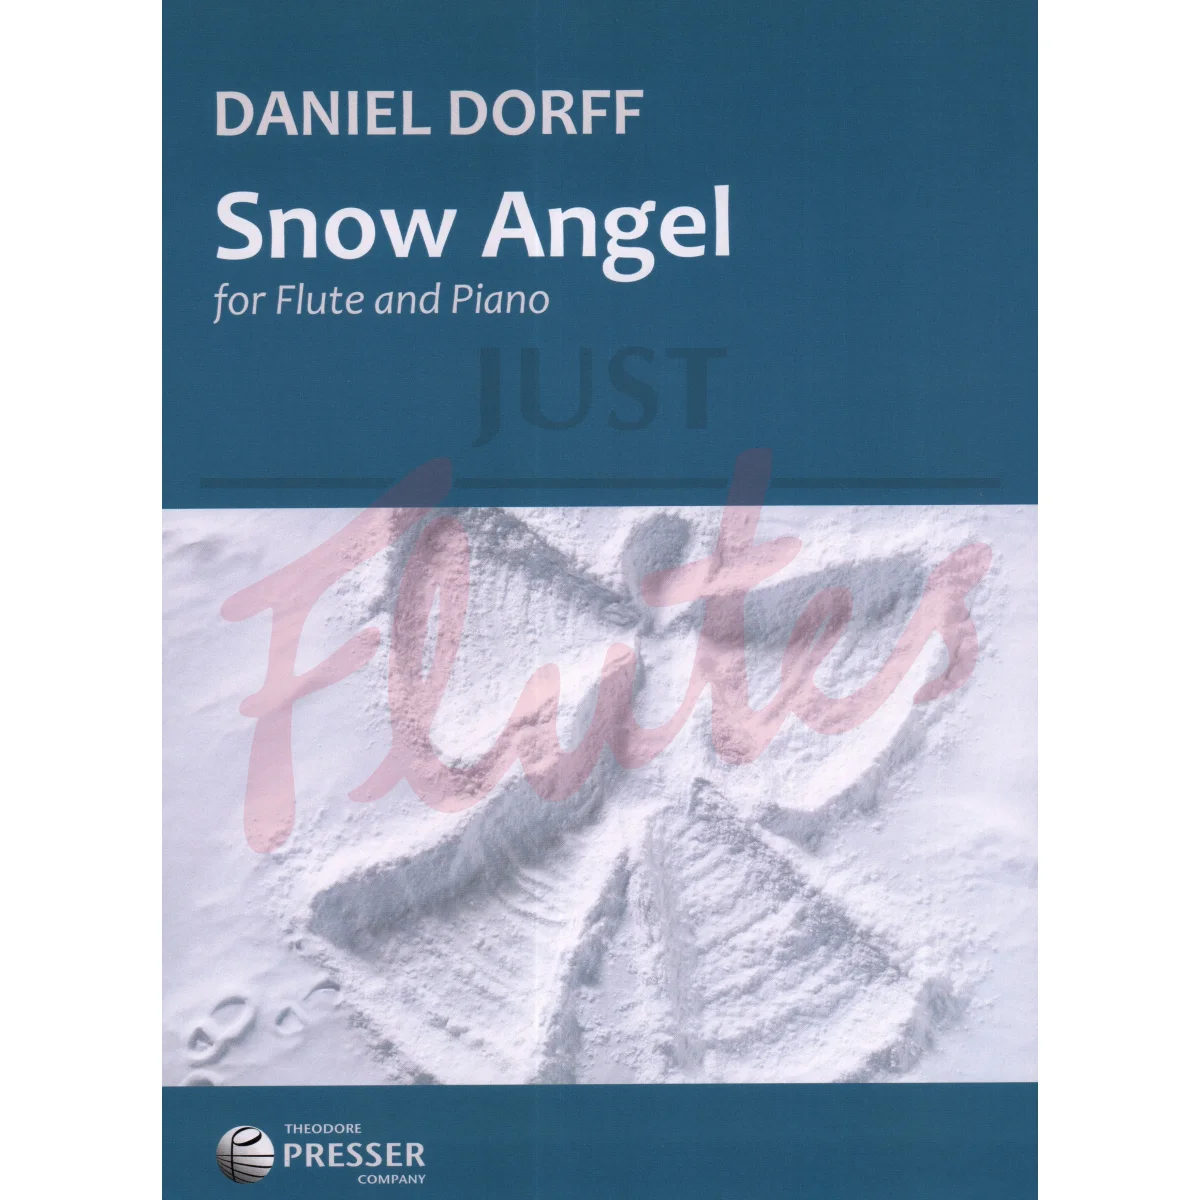 Snow Angel for Flute and Piano